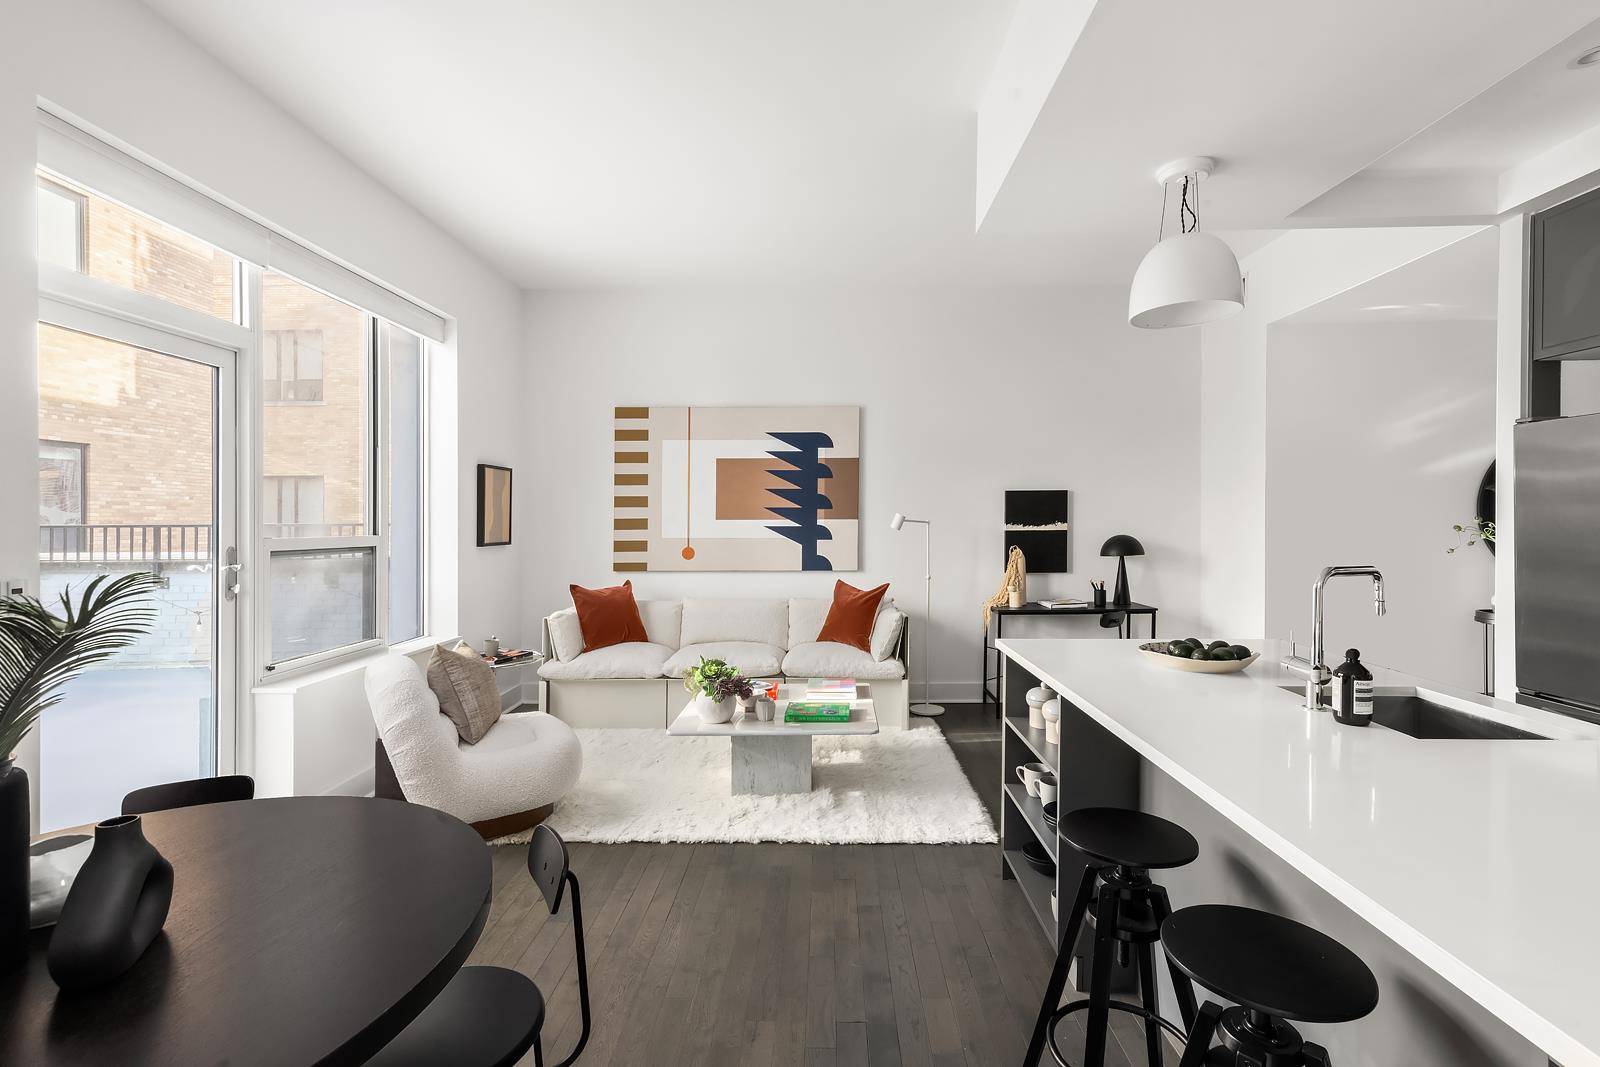 Indulge in urban luxury with this exquisite two bedroom, two bathroom residence which spans an impressive 1, 079 square feet of interior space and a massive 555 square foot private ...